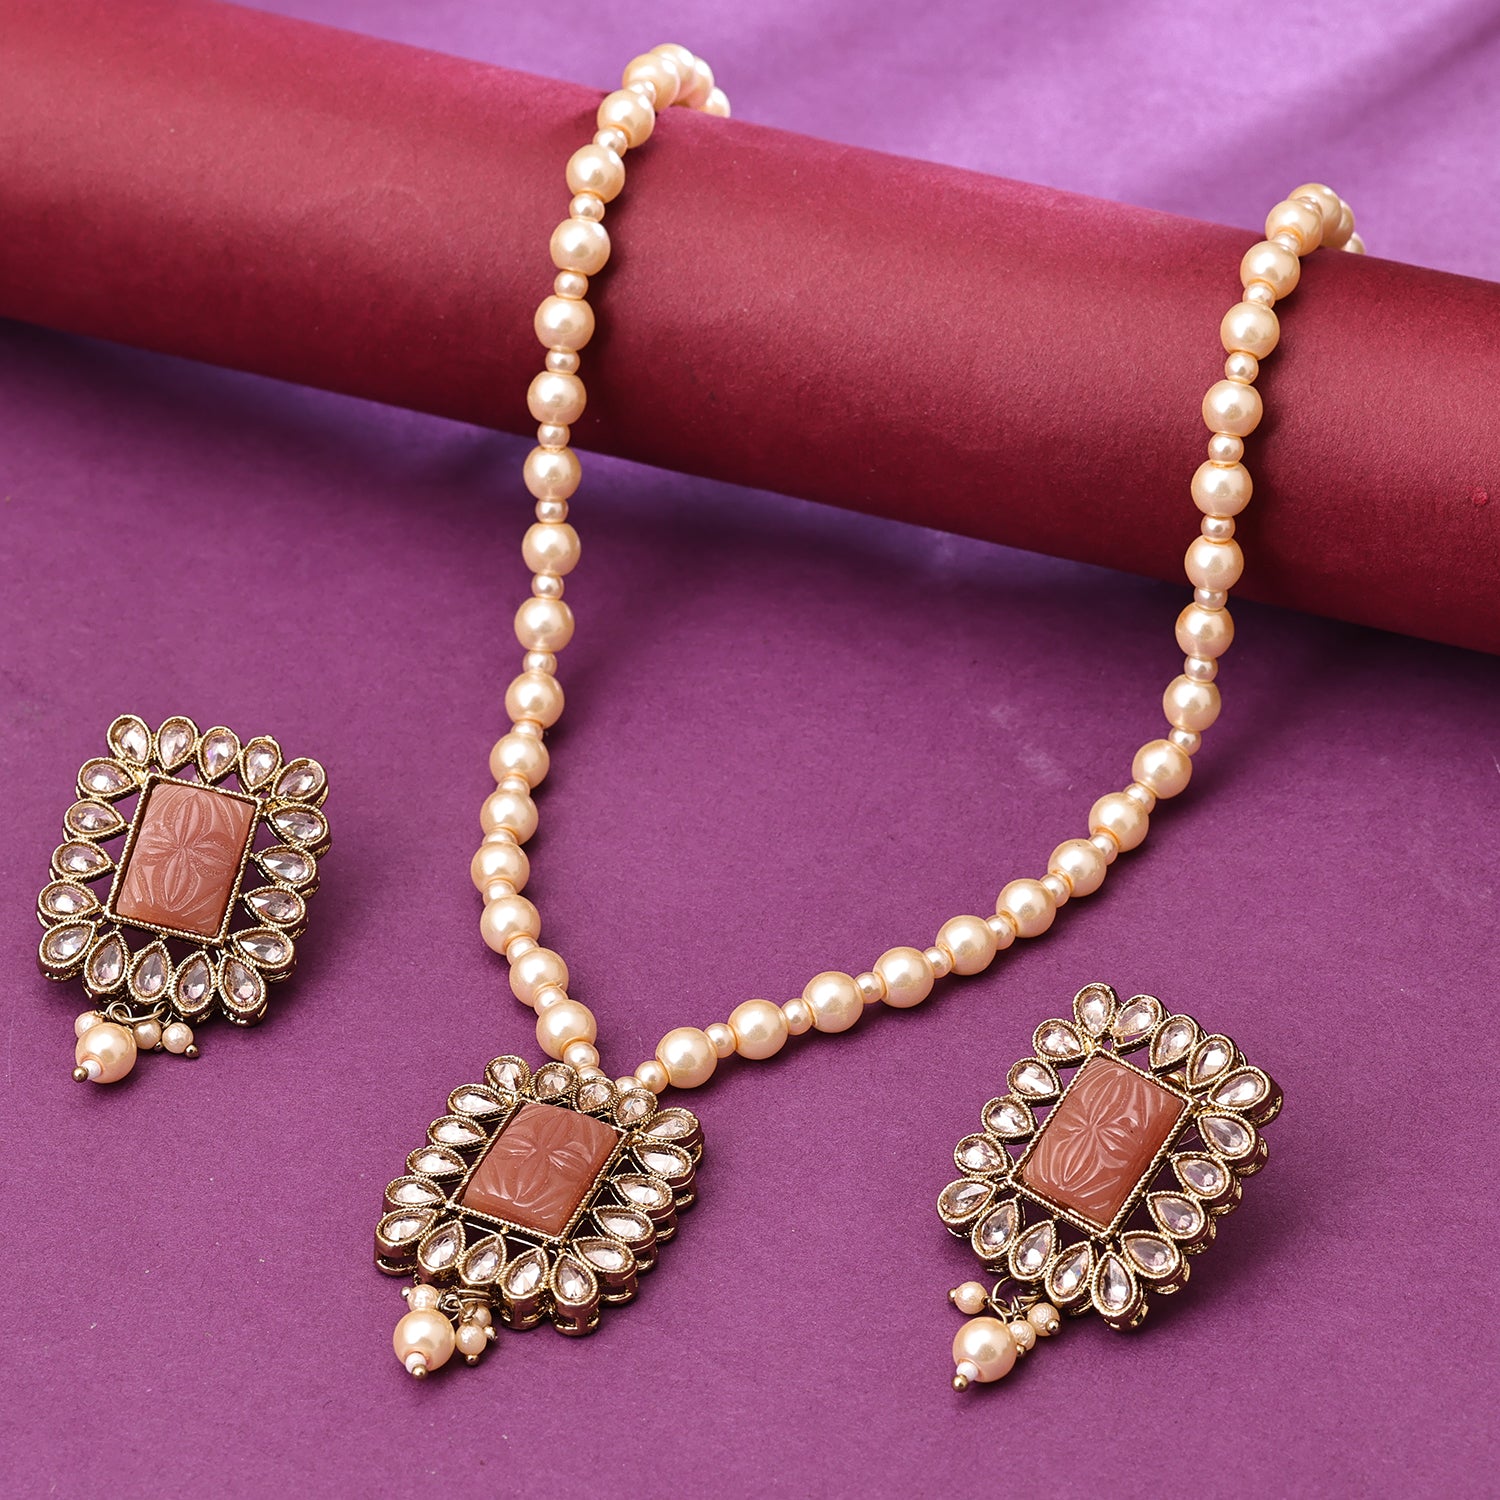 AD Kundan Necklace Set - Golden Pearls | Antique Gold-plated Jewellery